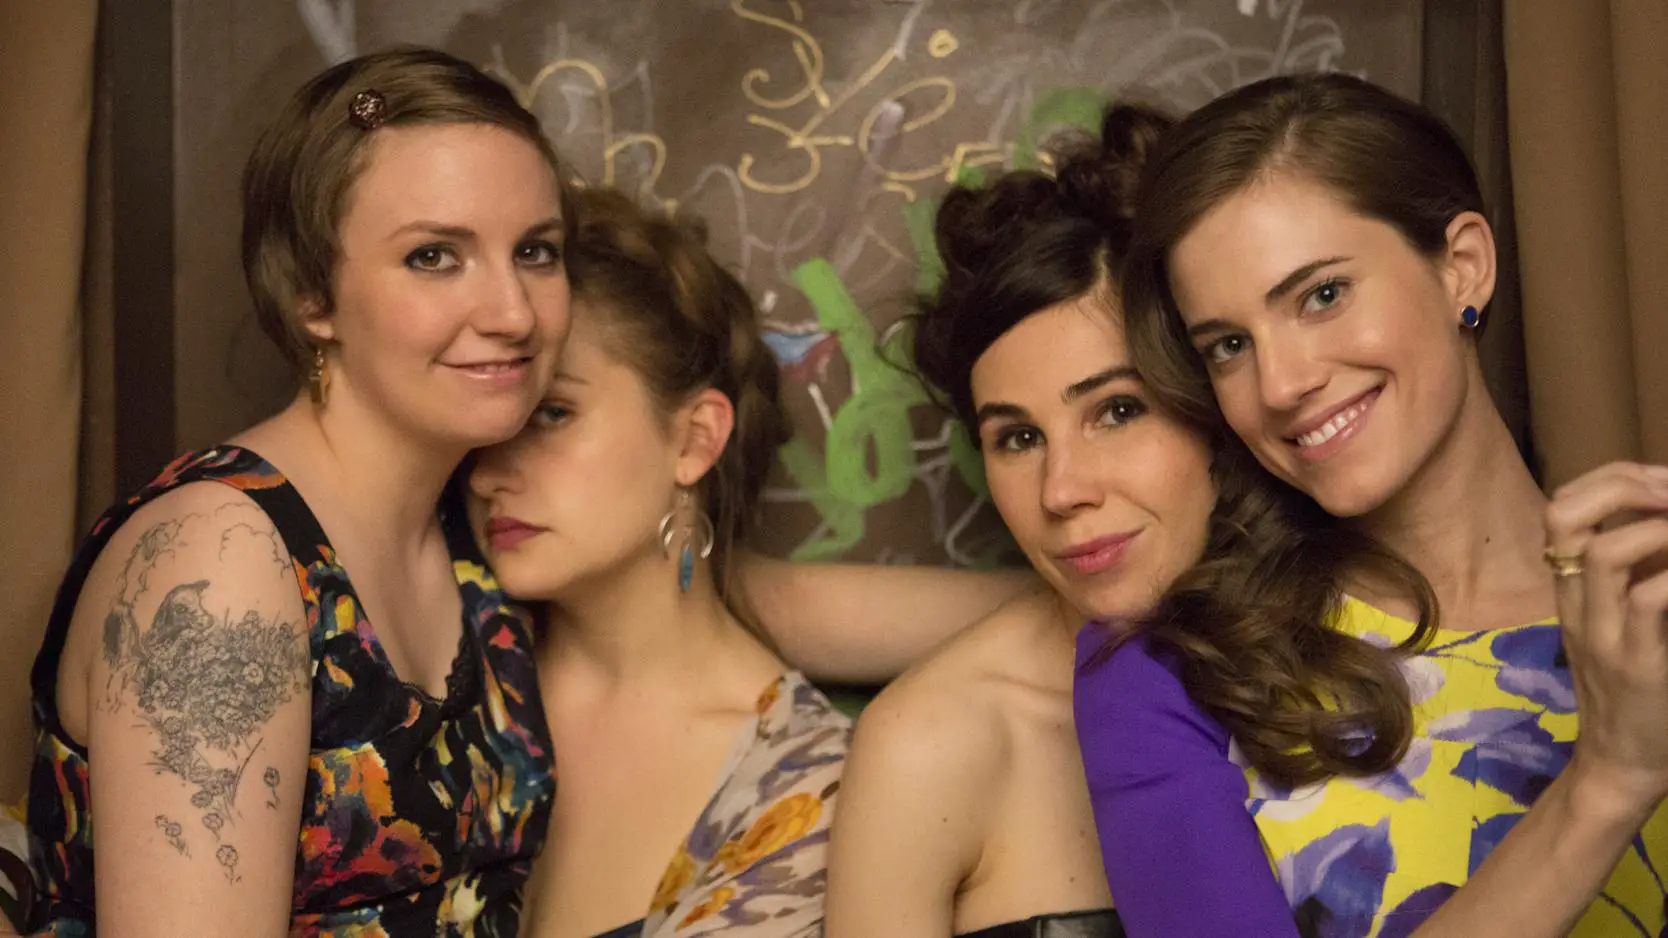 Why Every 20-Something Female Needs to Watch the New Season of “Girls”